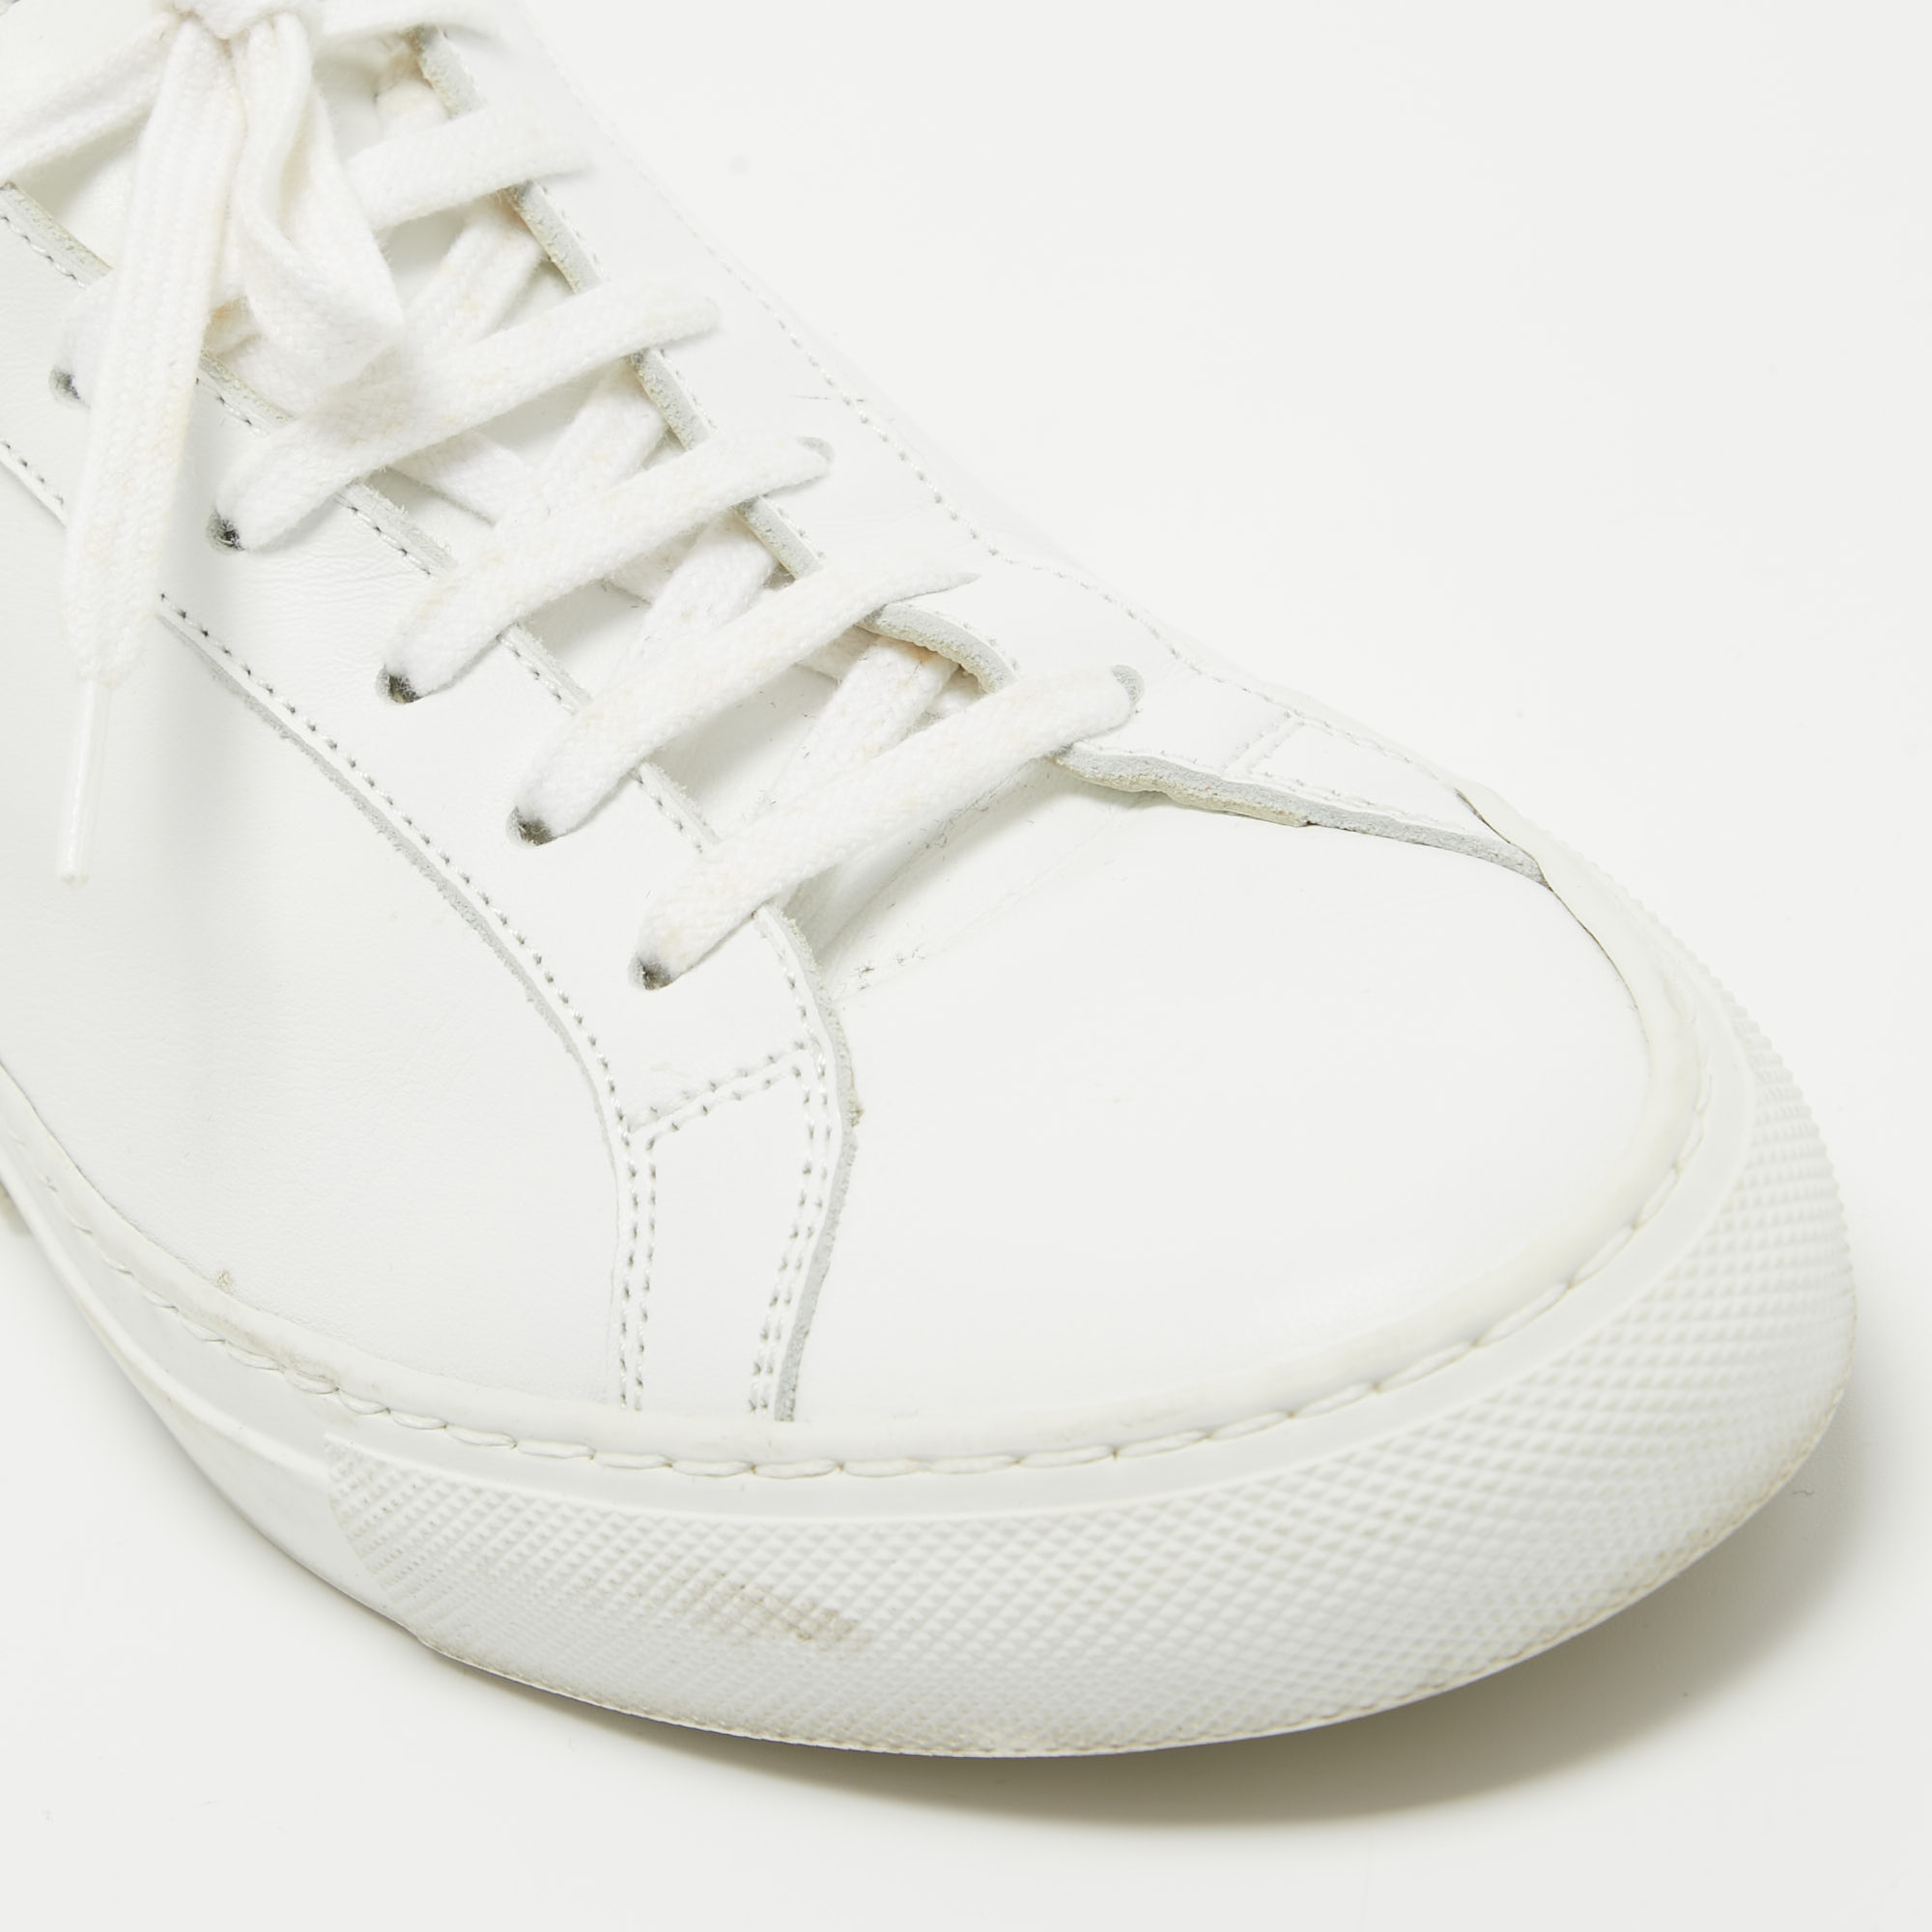 Common Projects White Leather Achilles Sneakers Size 38